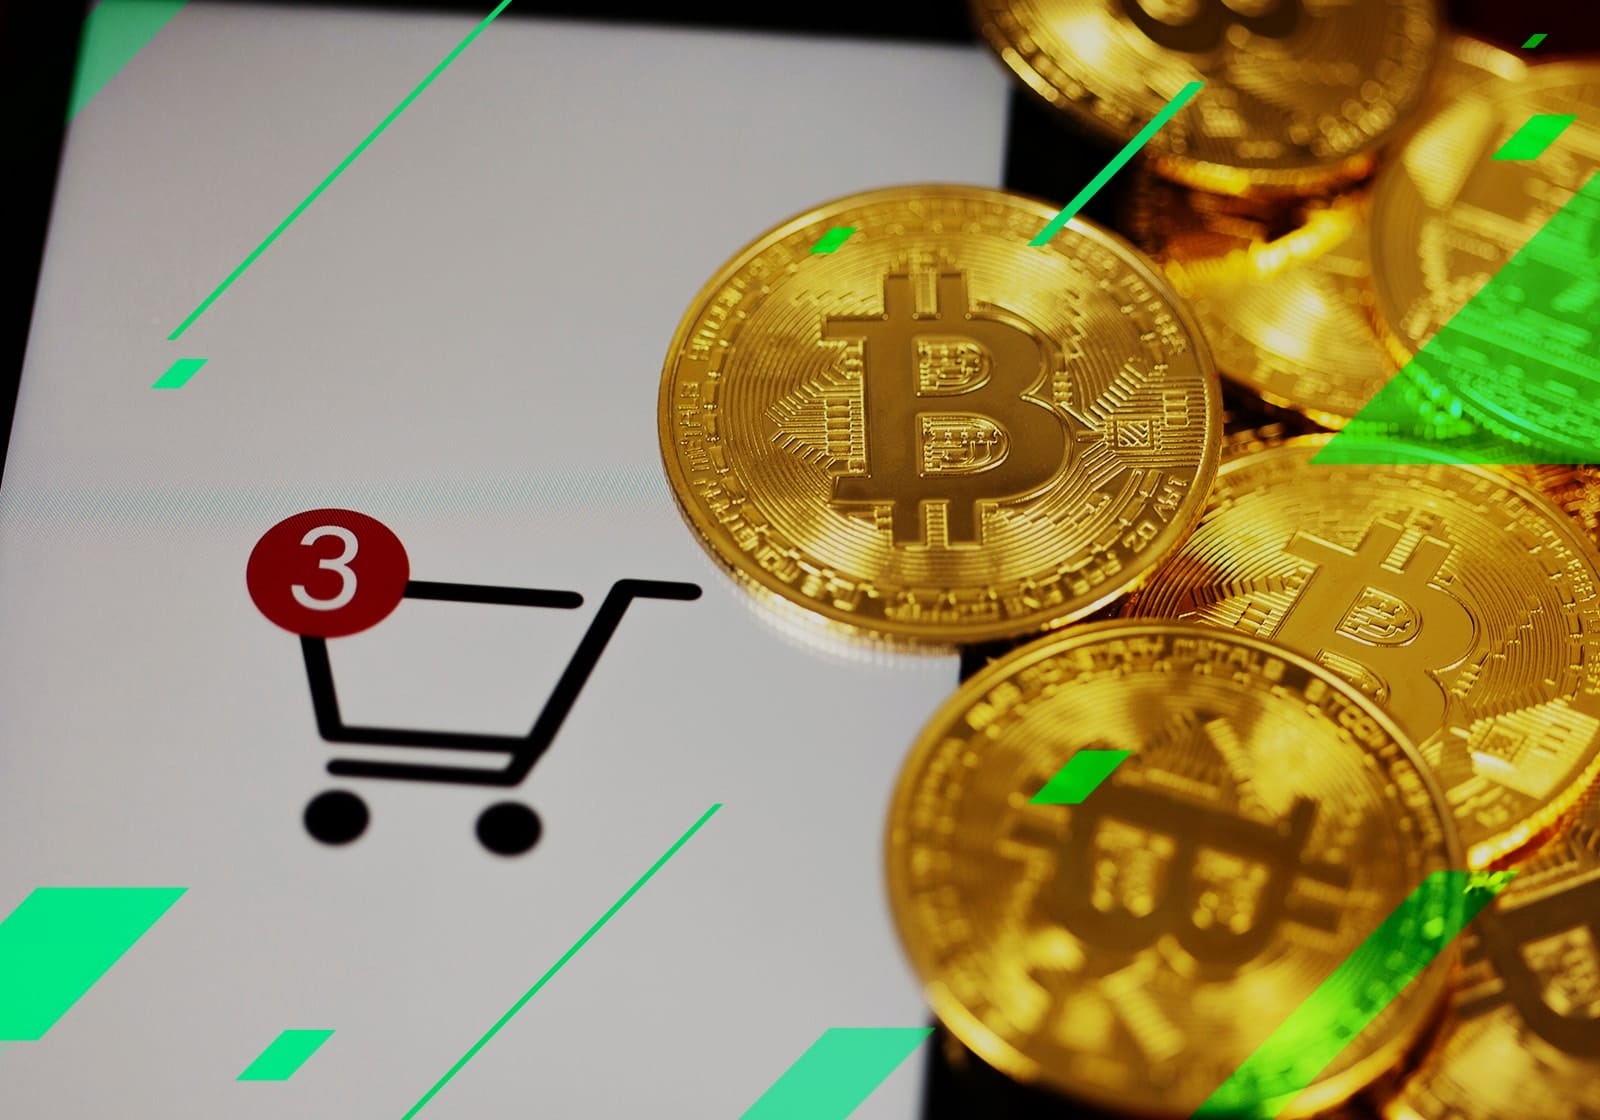 What can you buy with bitcoin